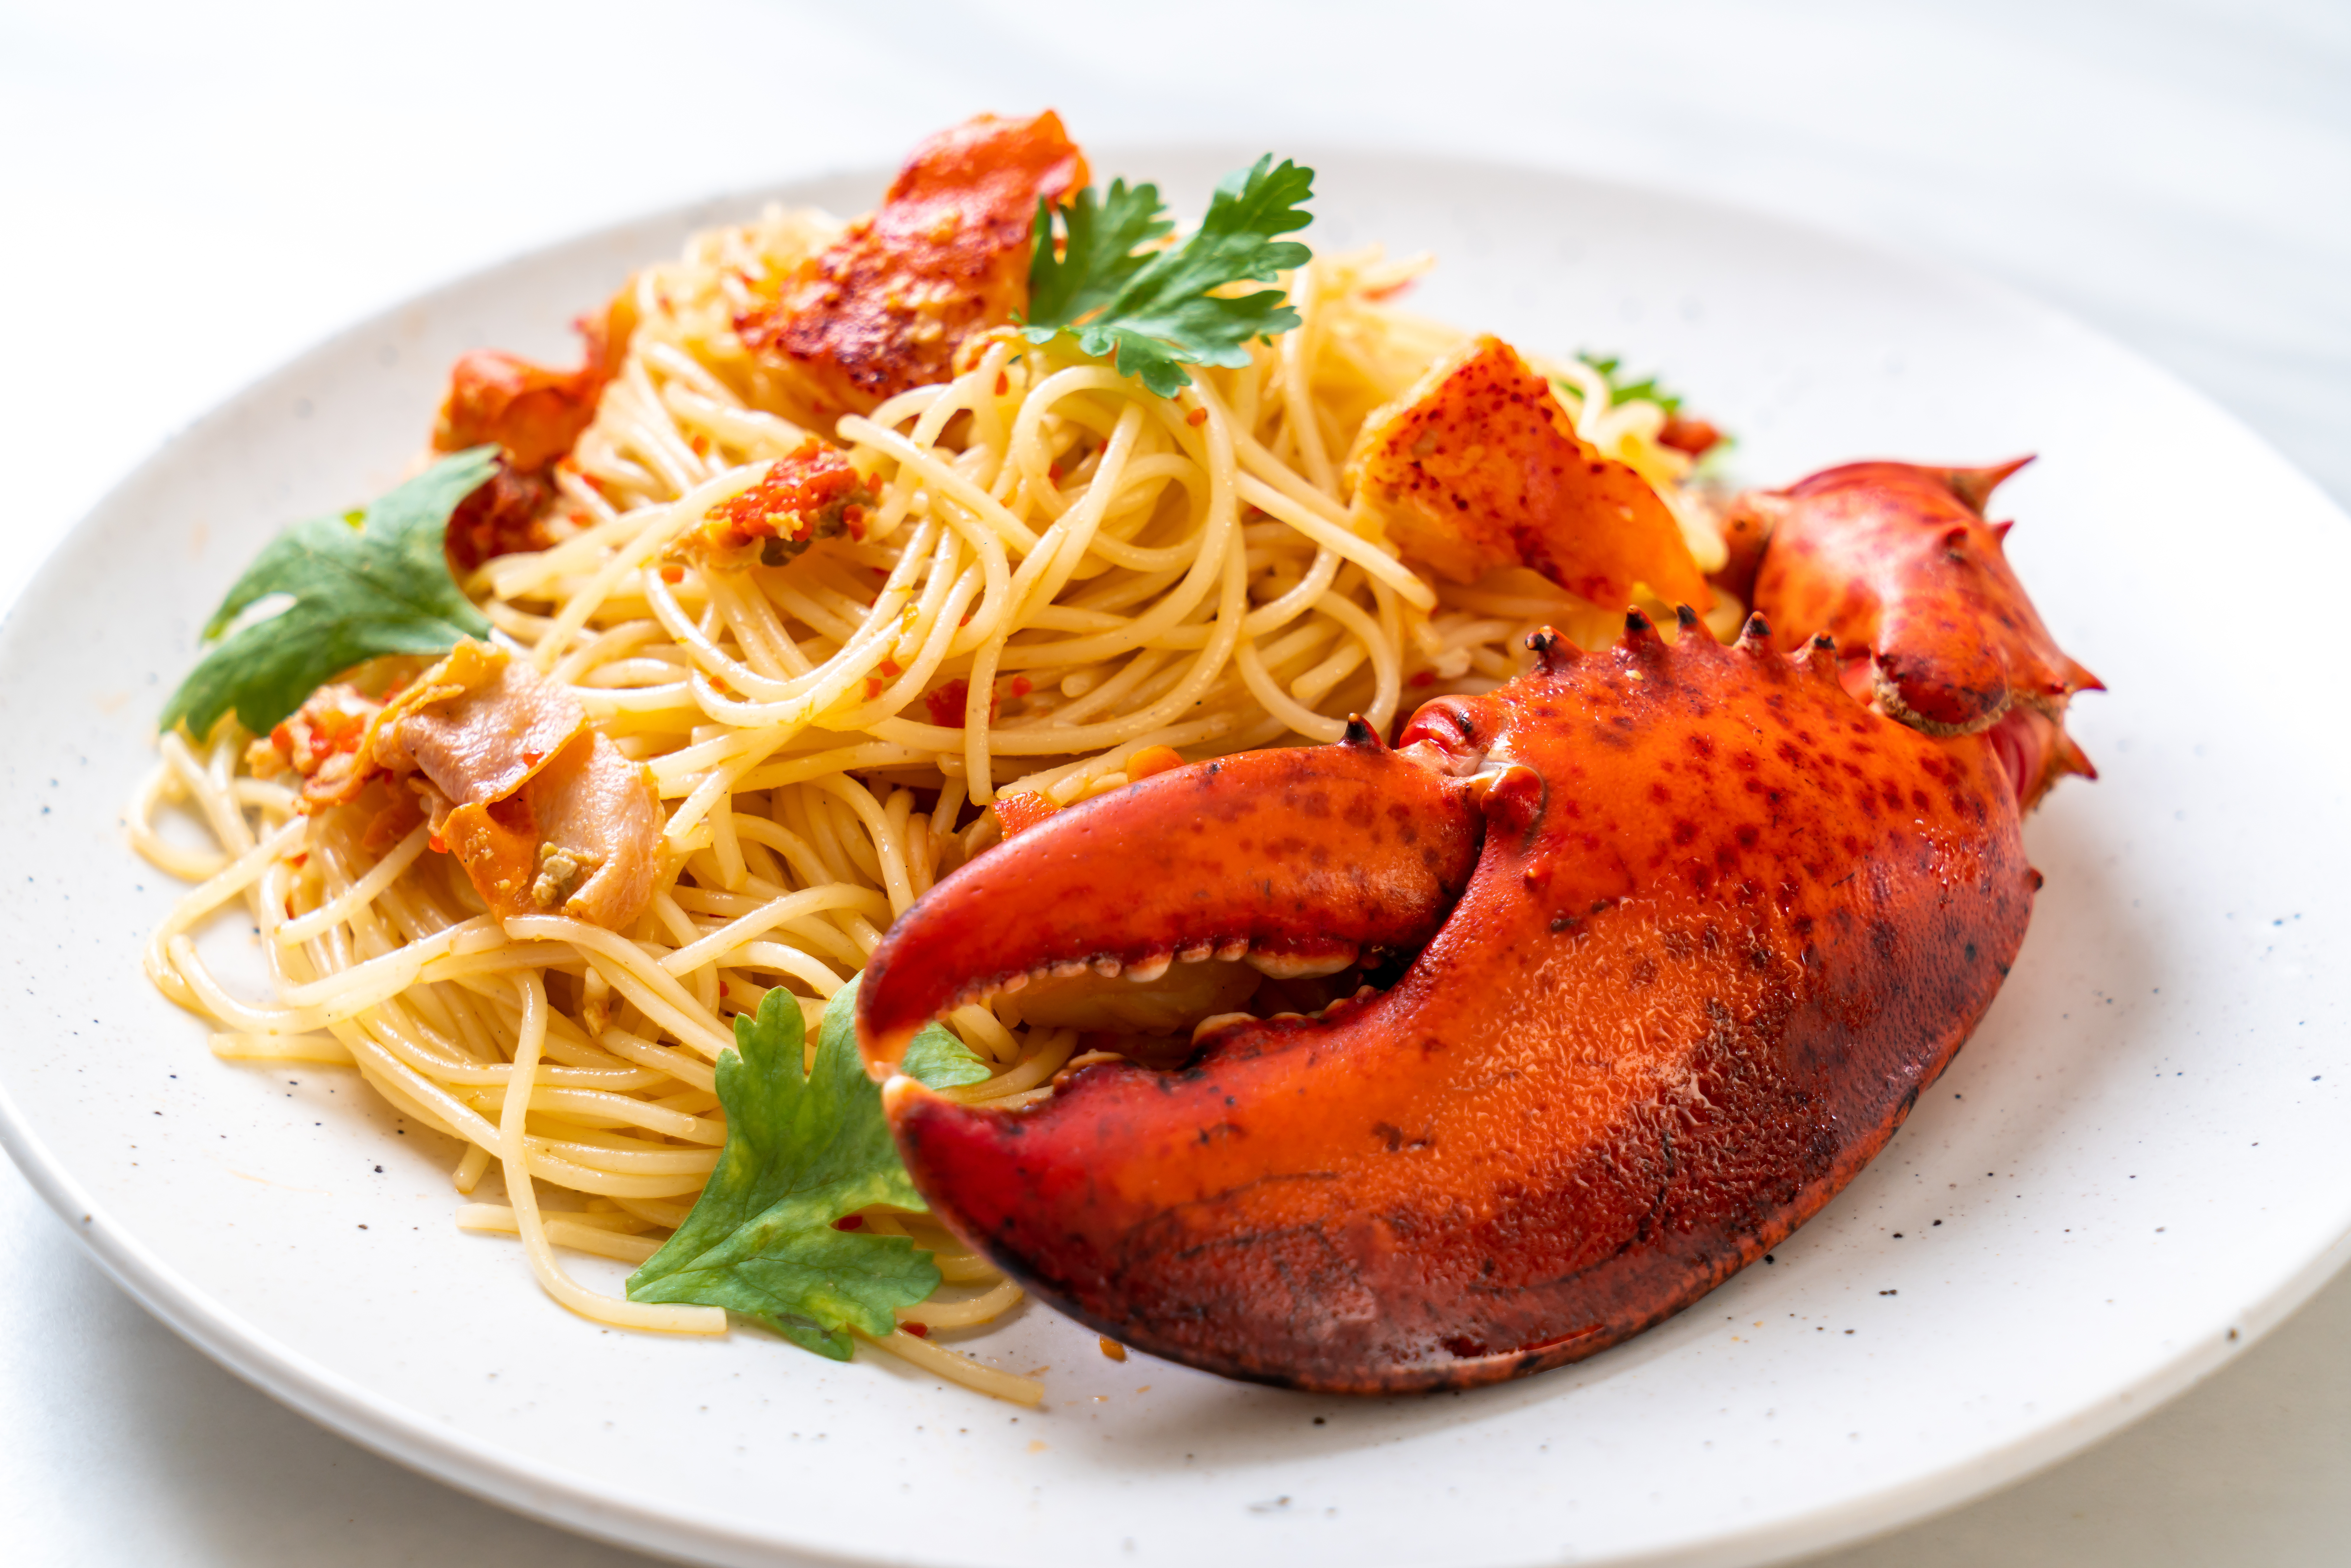 Getting Married? Here Are 12 Delicious Ways to Include Lobster on the Menu